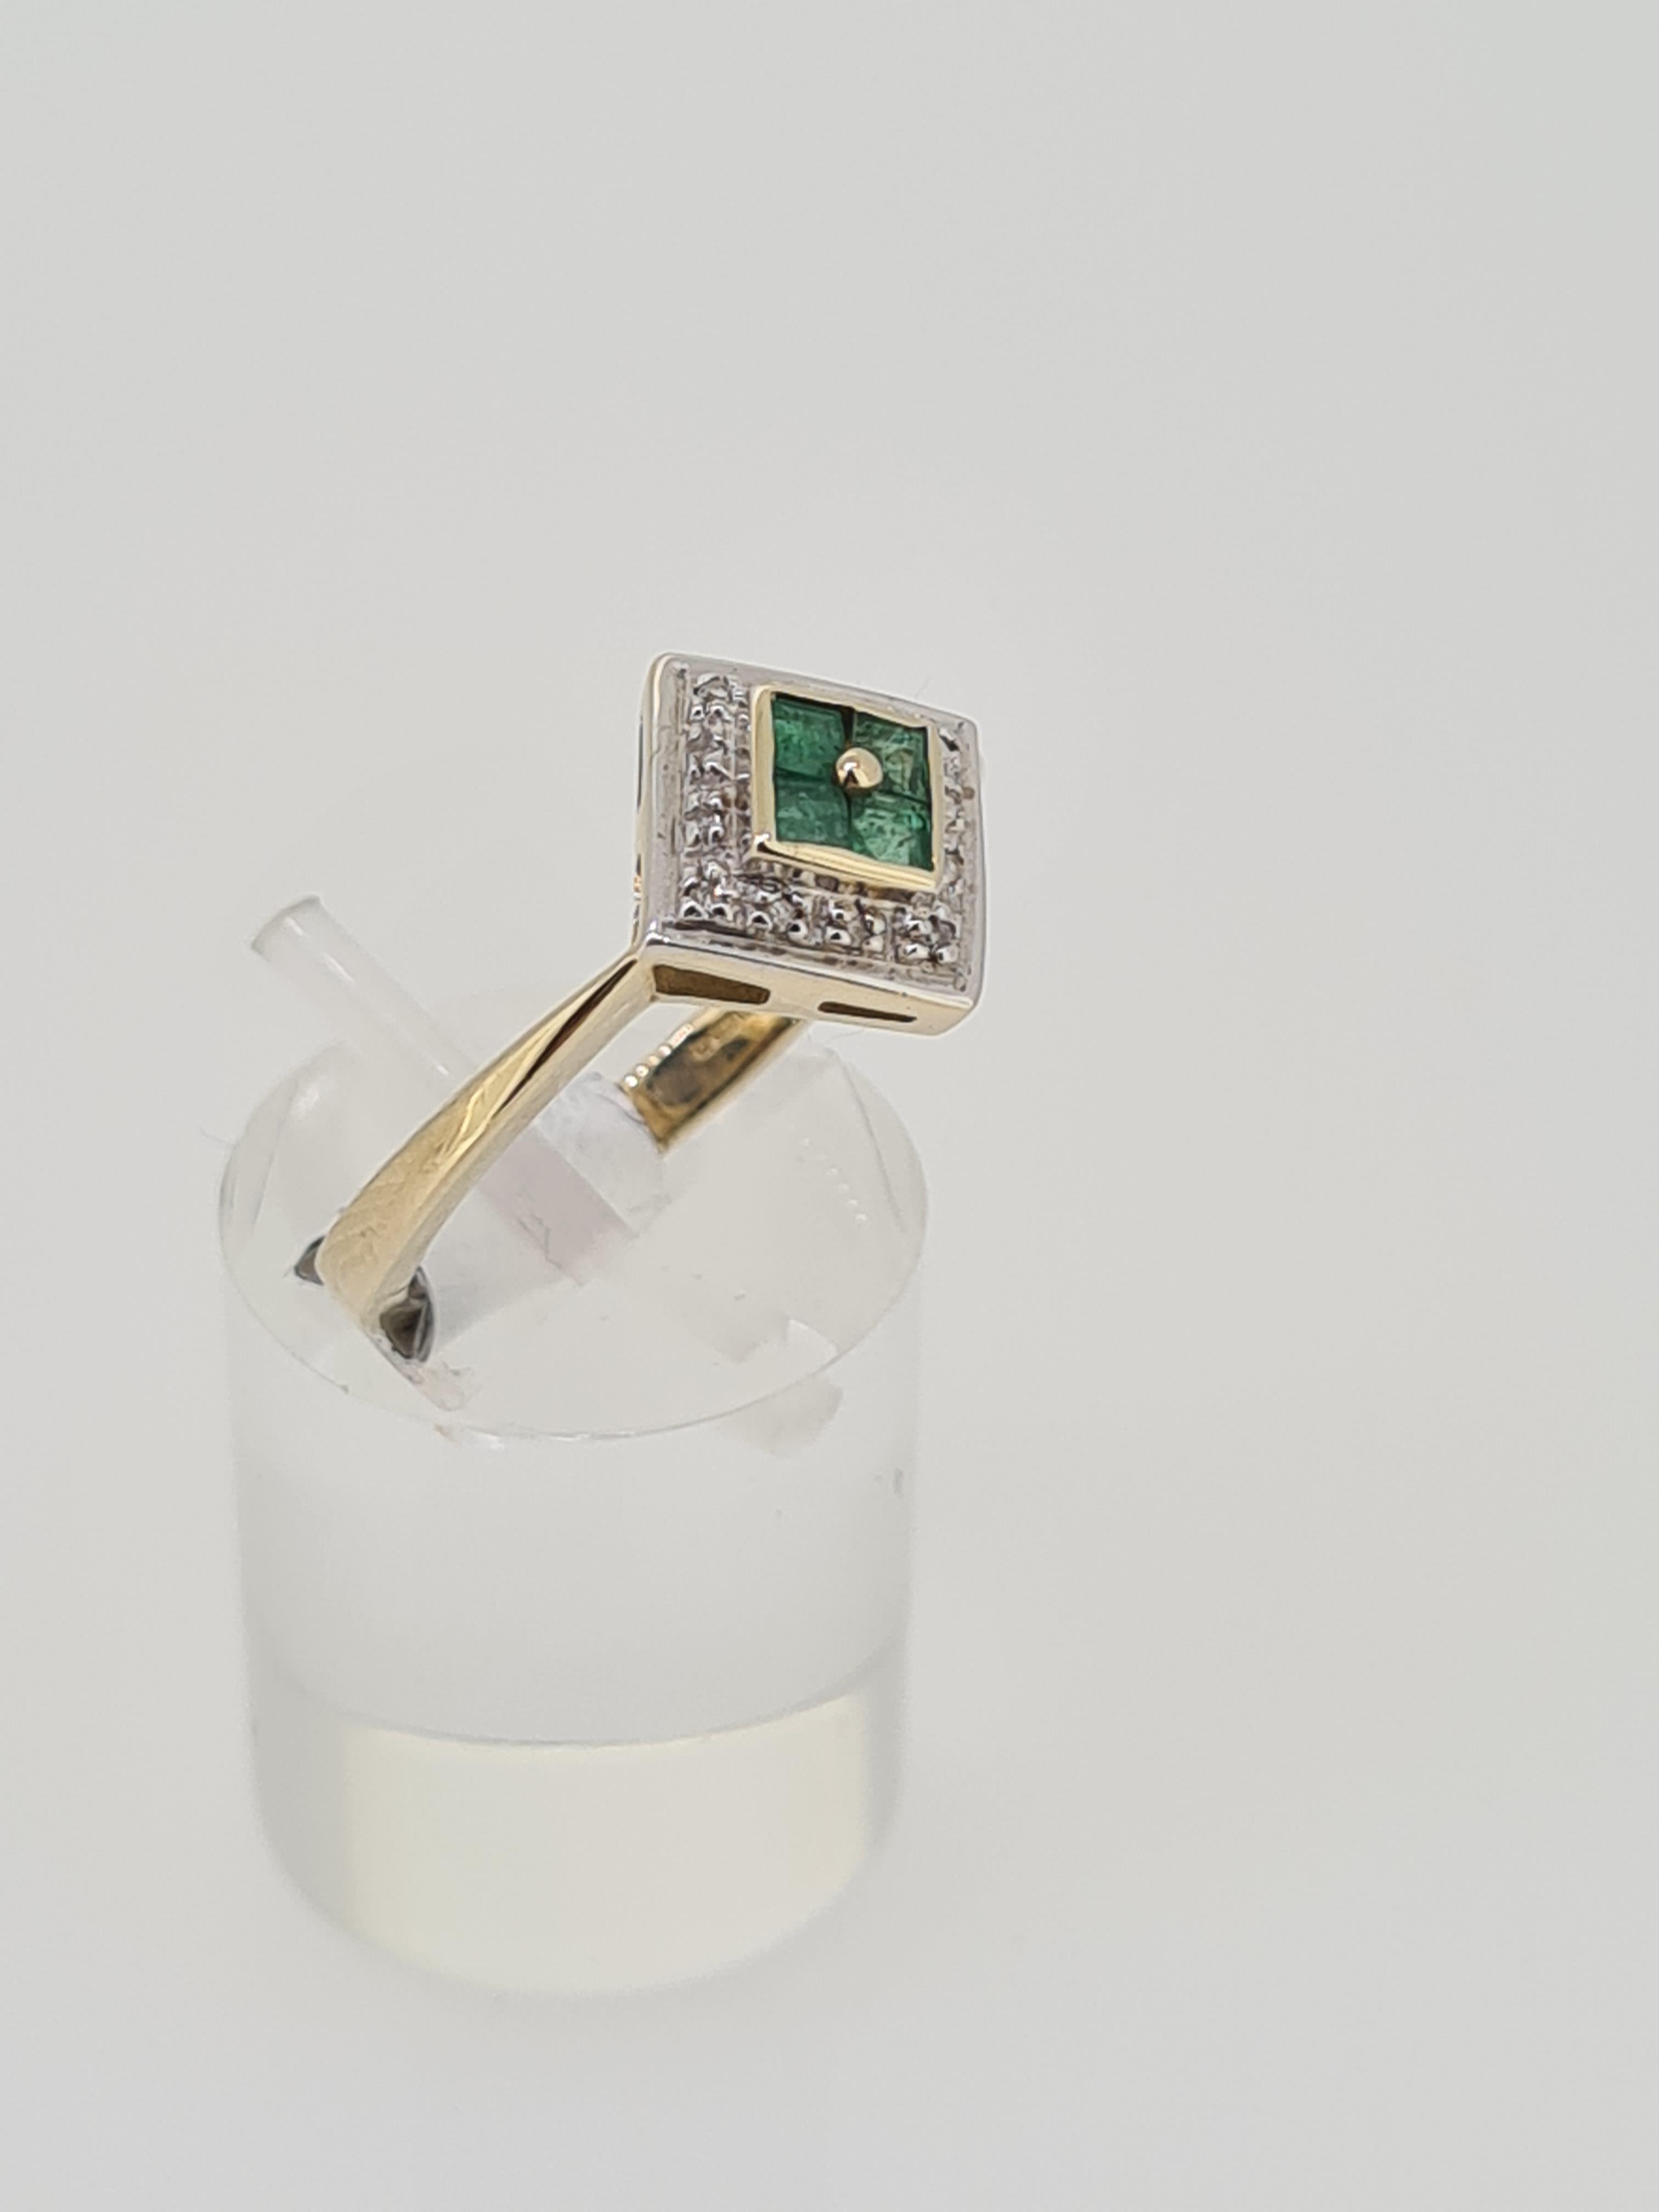 9ct gold emerald and diamond ring - Image 2 of 4